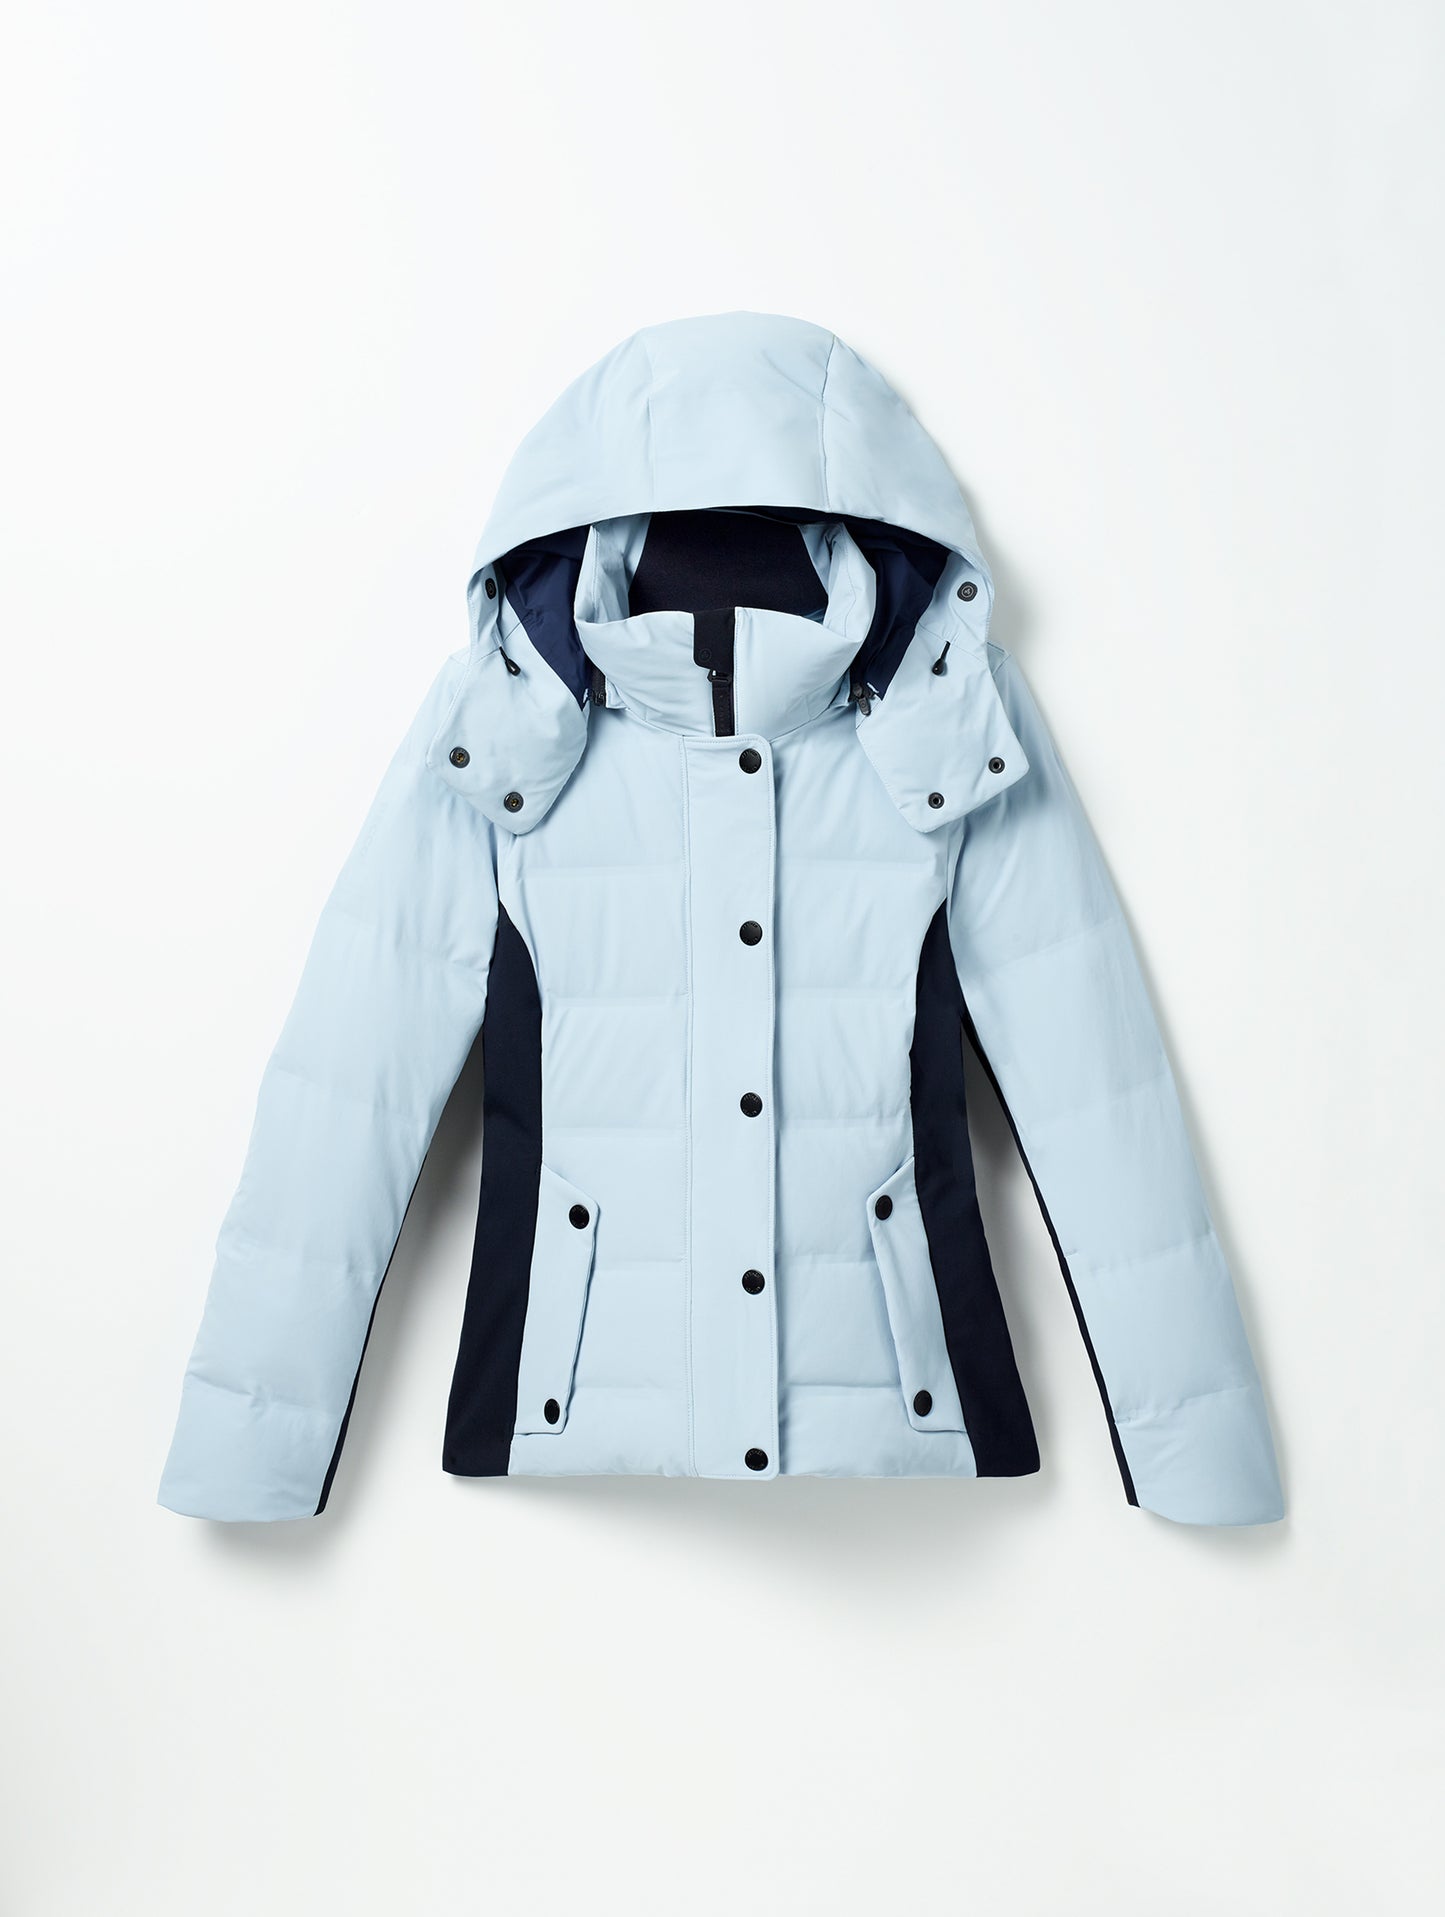 light blue ski jacket for women from Aether Apparel